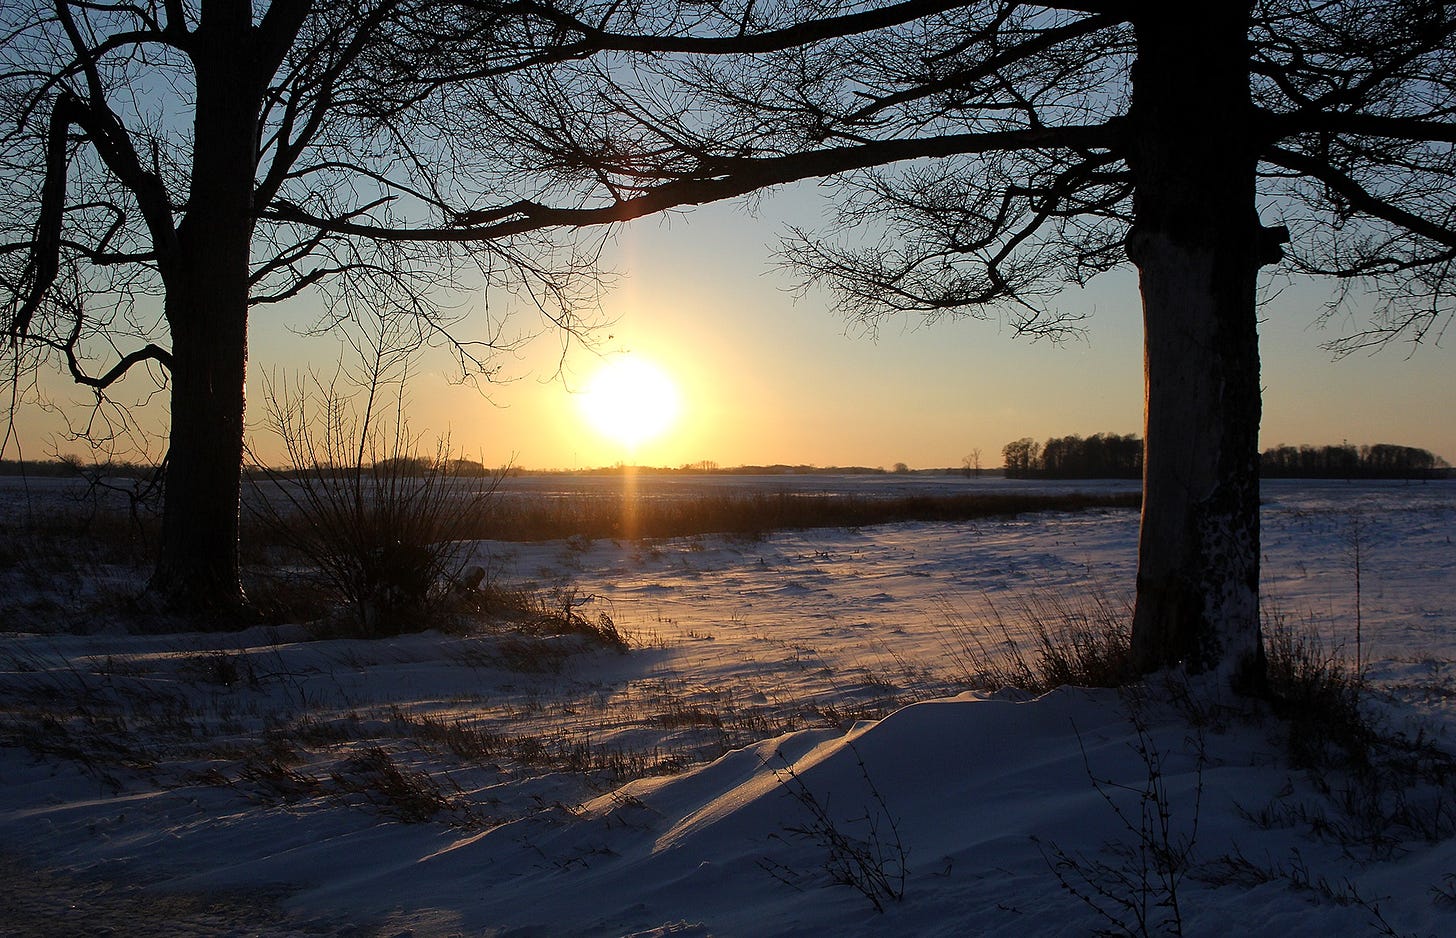 Sunset on a snowy day in Henry County, Indiana.